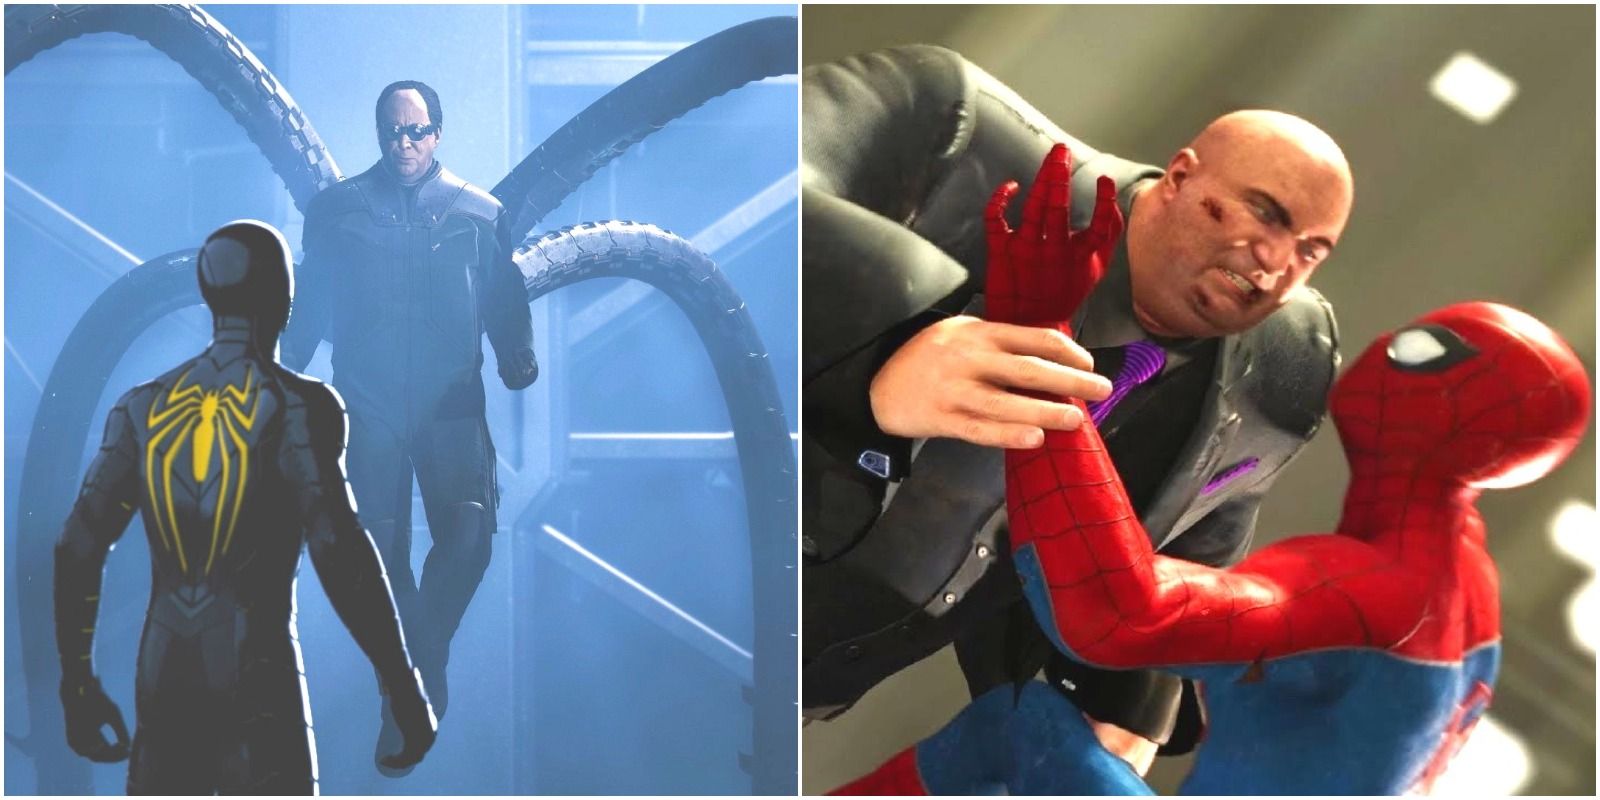 Spider-Man fighting the Kingpin and Doc Ock from Marvel's Spider-Man